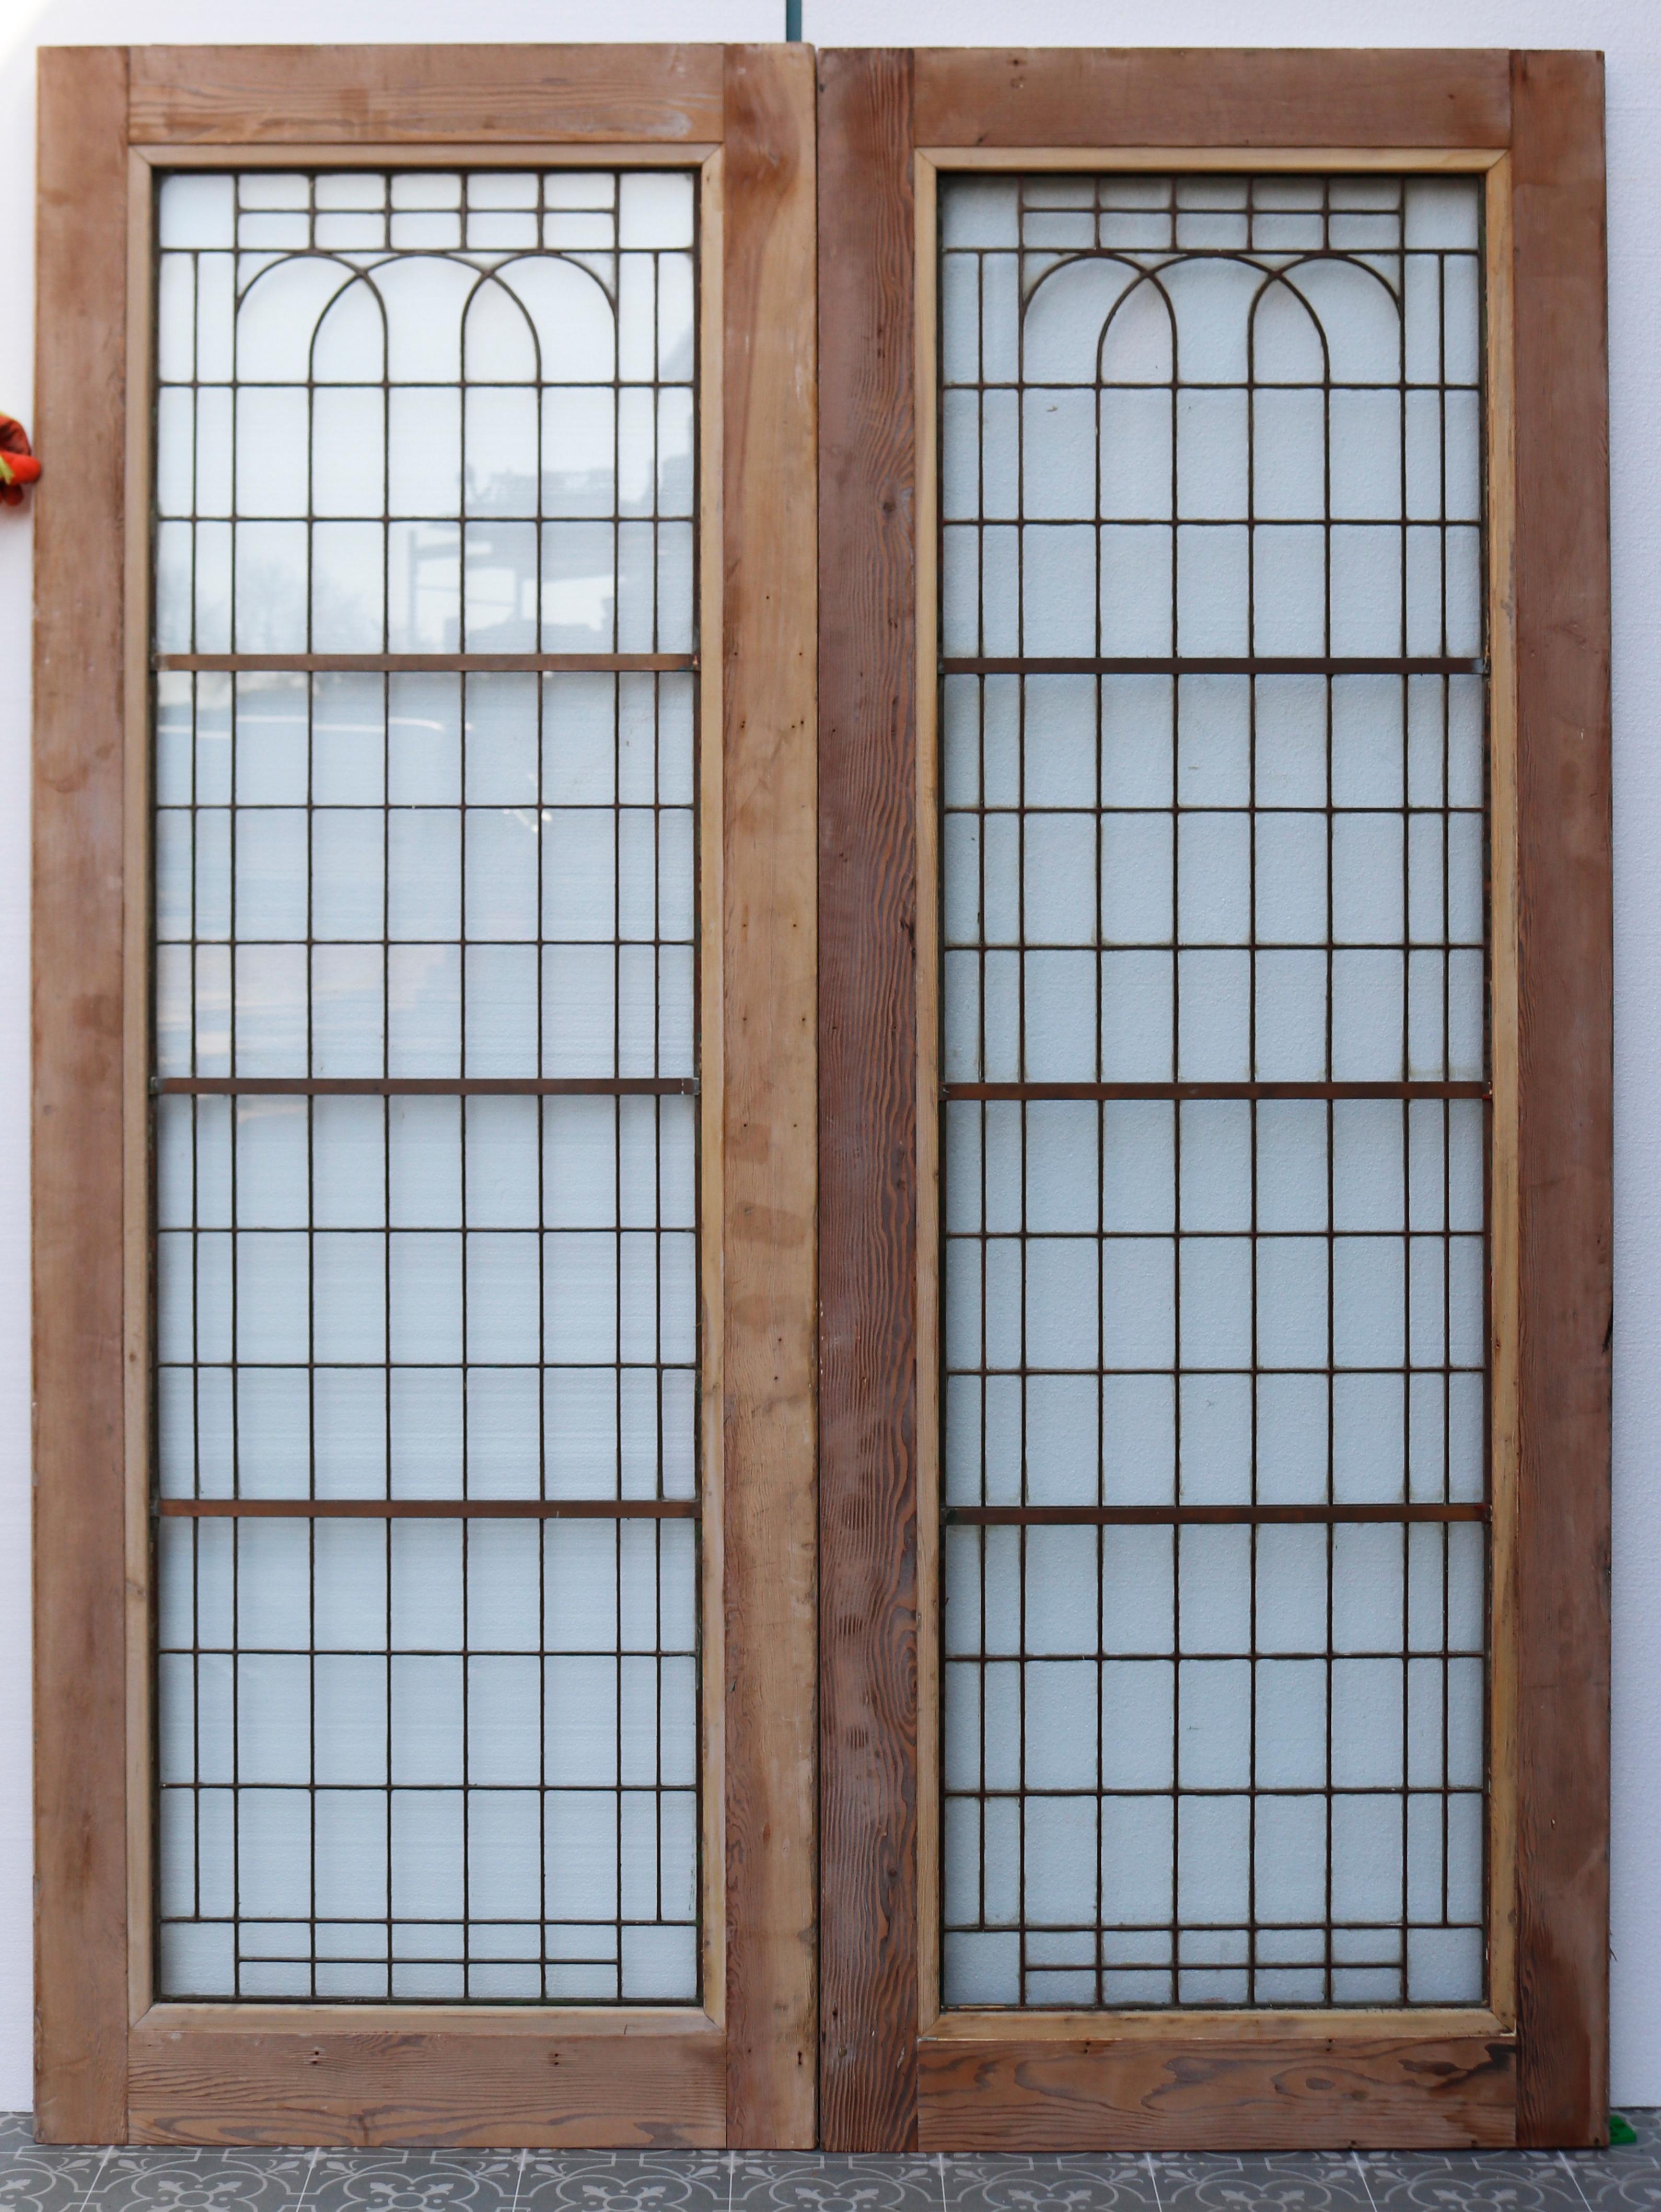 Set of reclaimed Art Deco copper-light double doors with full length glazing.

We have several similar sets available.